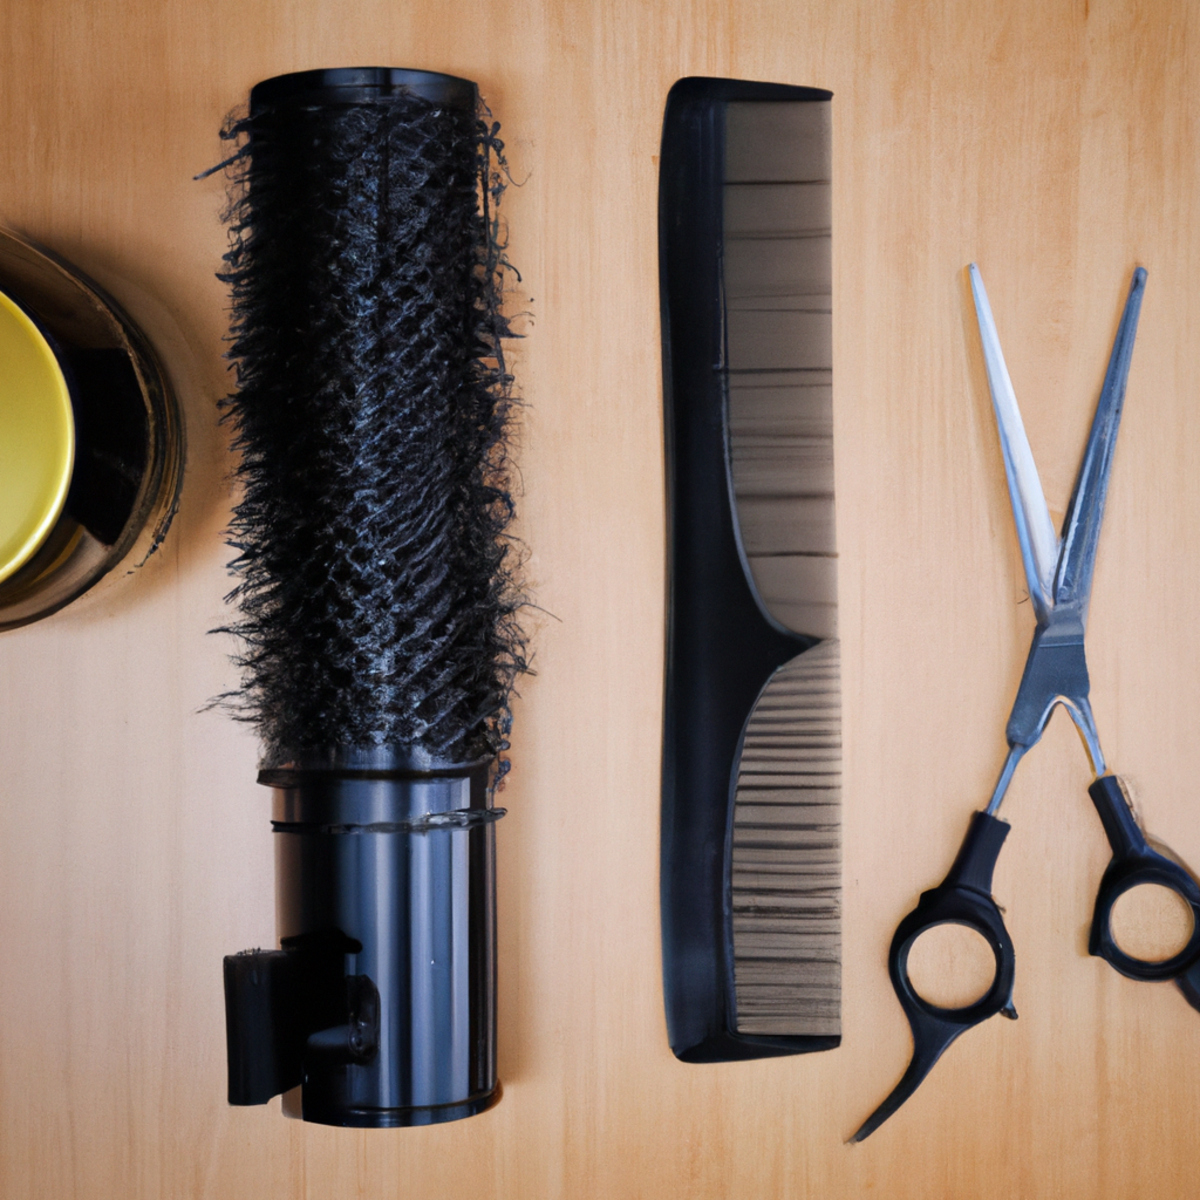 Grooming essentials: black comb, hair oil, styling wax, scissors on wooden surface. Sophisticated and refined.